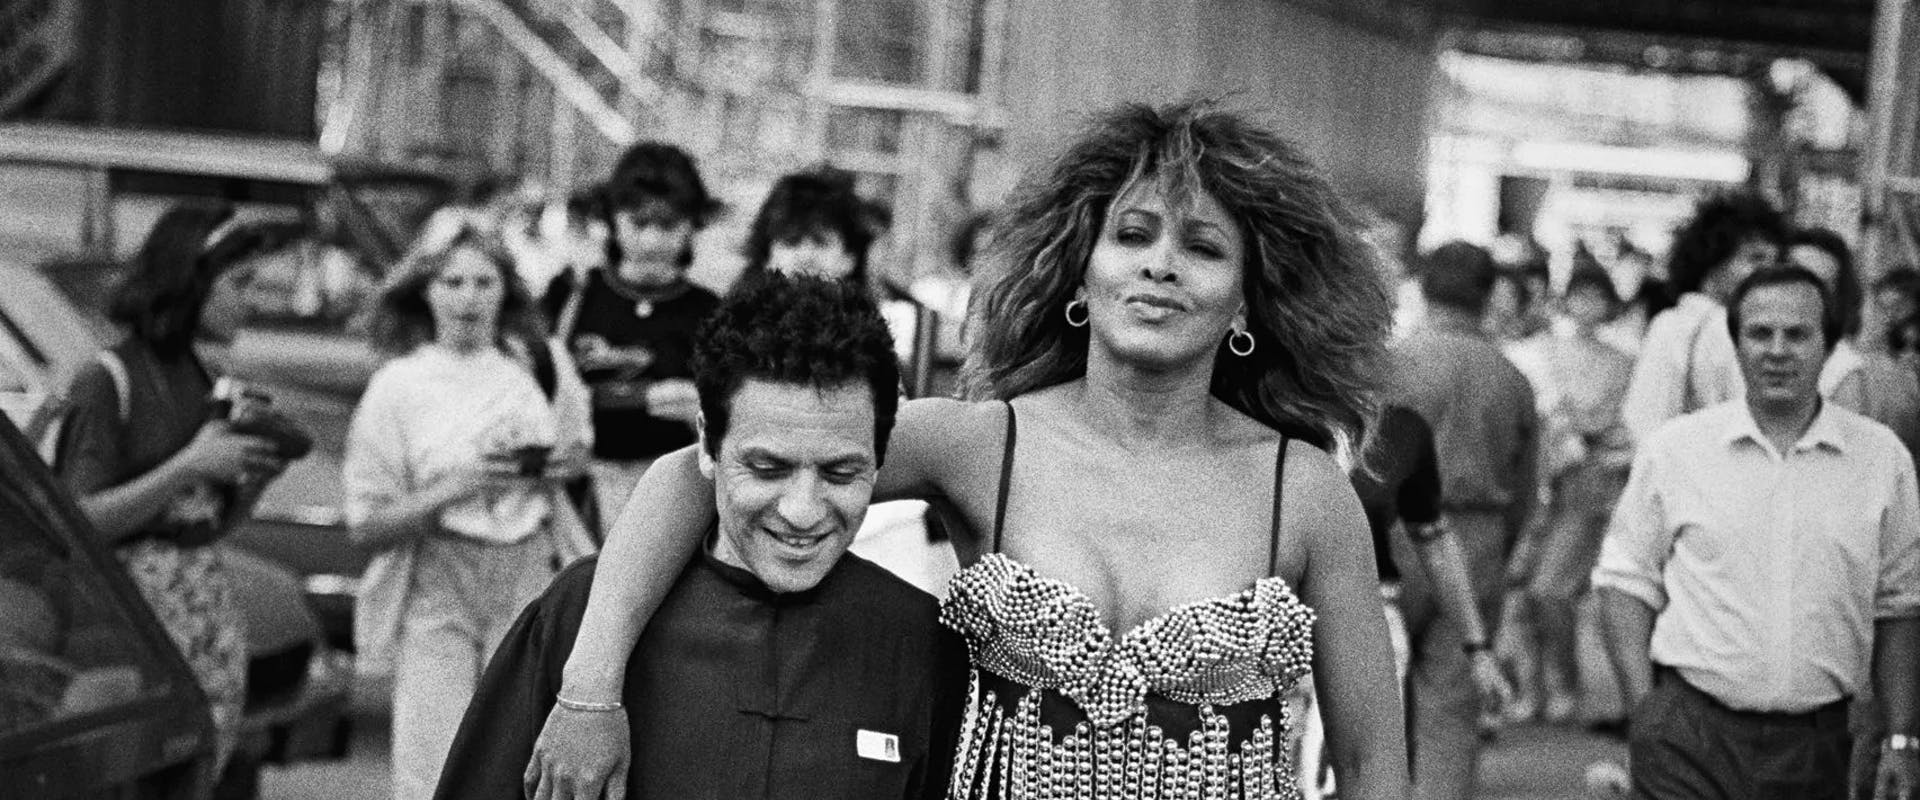 New Photography Exhibition Brings Azzedine Alaïa and Peter Lindbergh’s Legacies Together